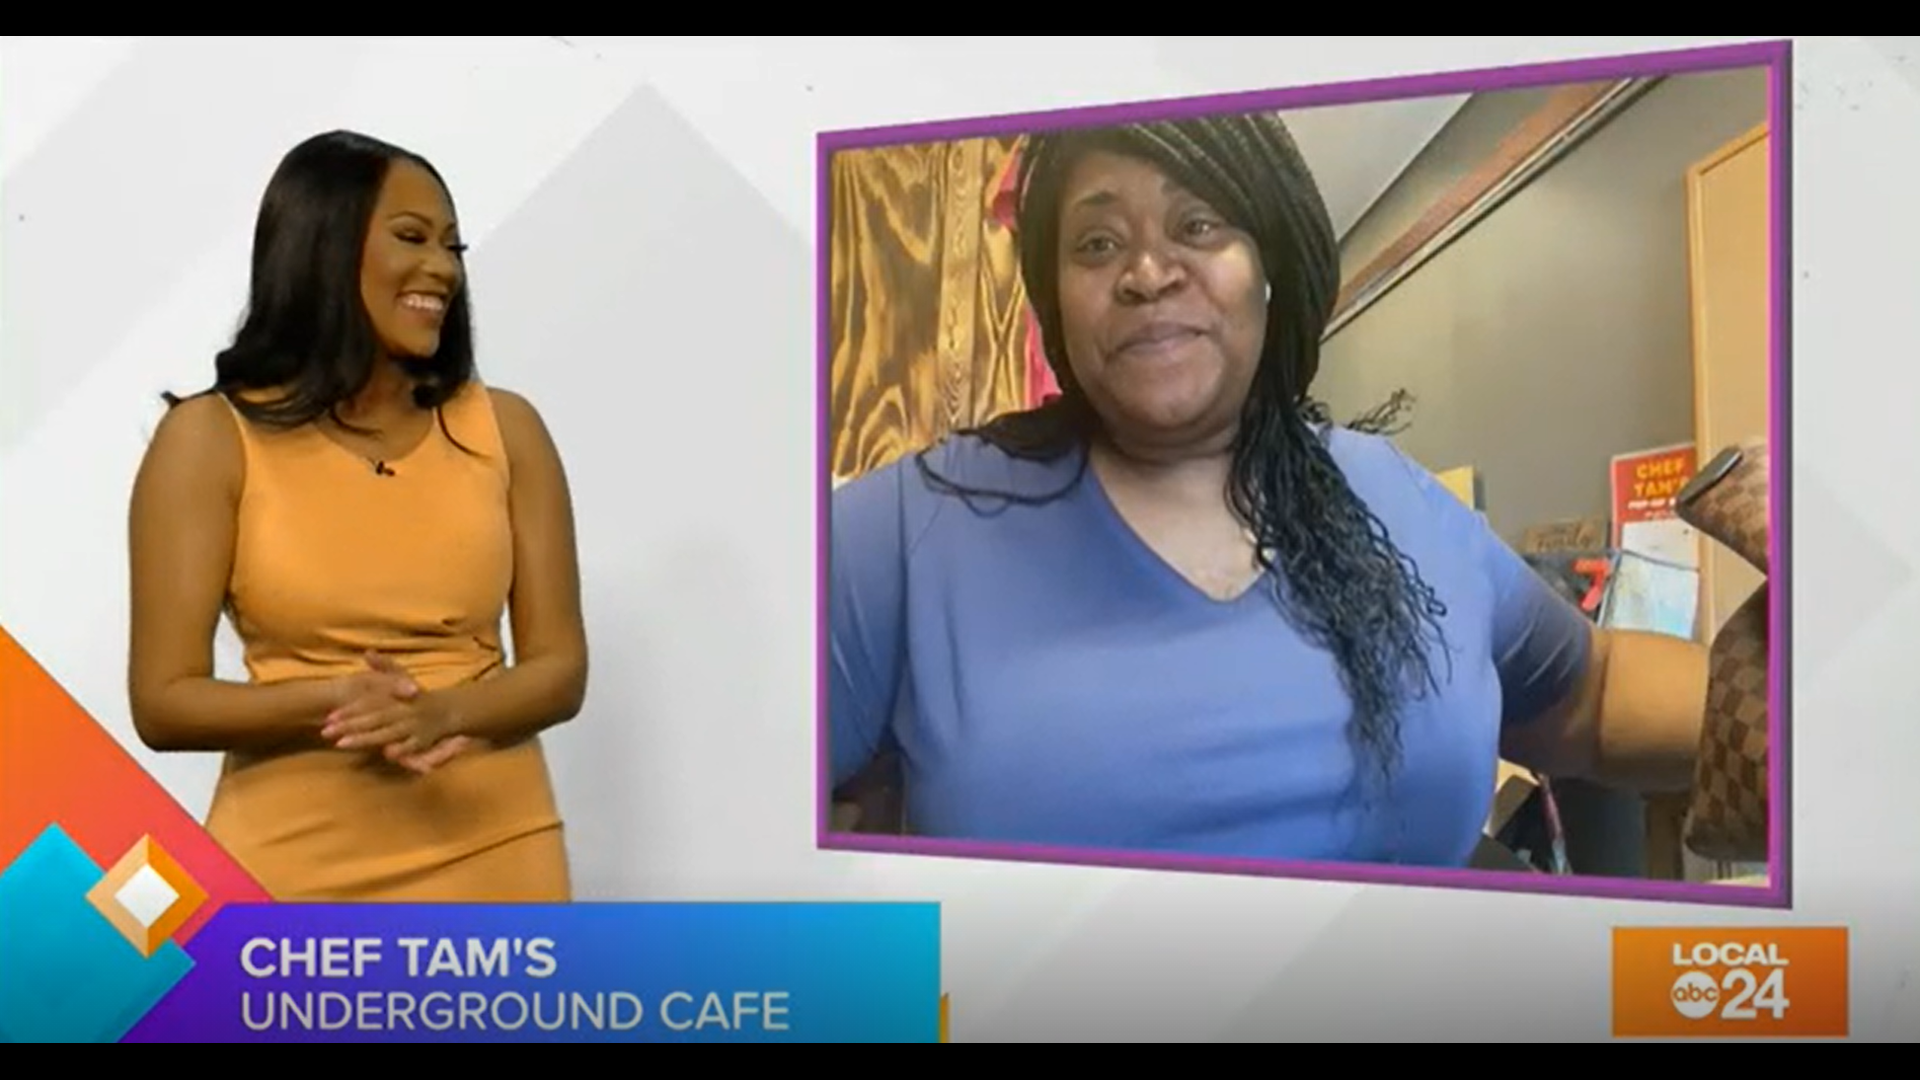 Join Sydney Neely as we get to know another face in the Memphis black restaurant scene starring Tamera Patterson, the owner of Chef Tam's Underground Café!